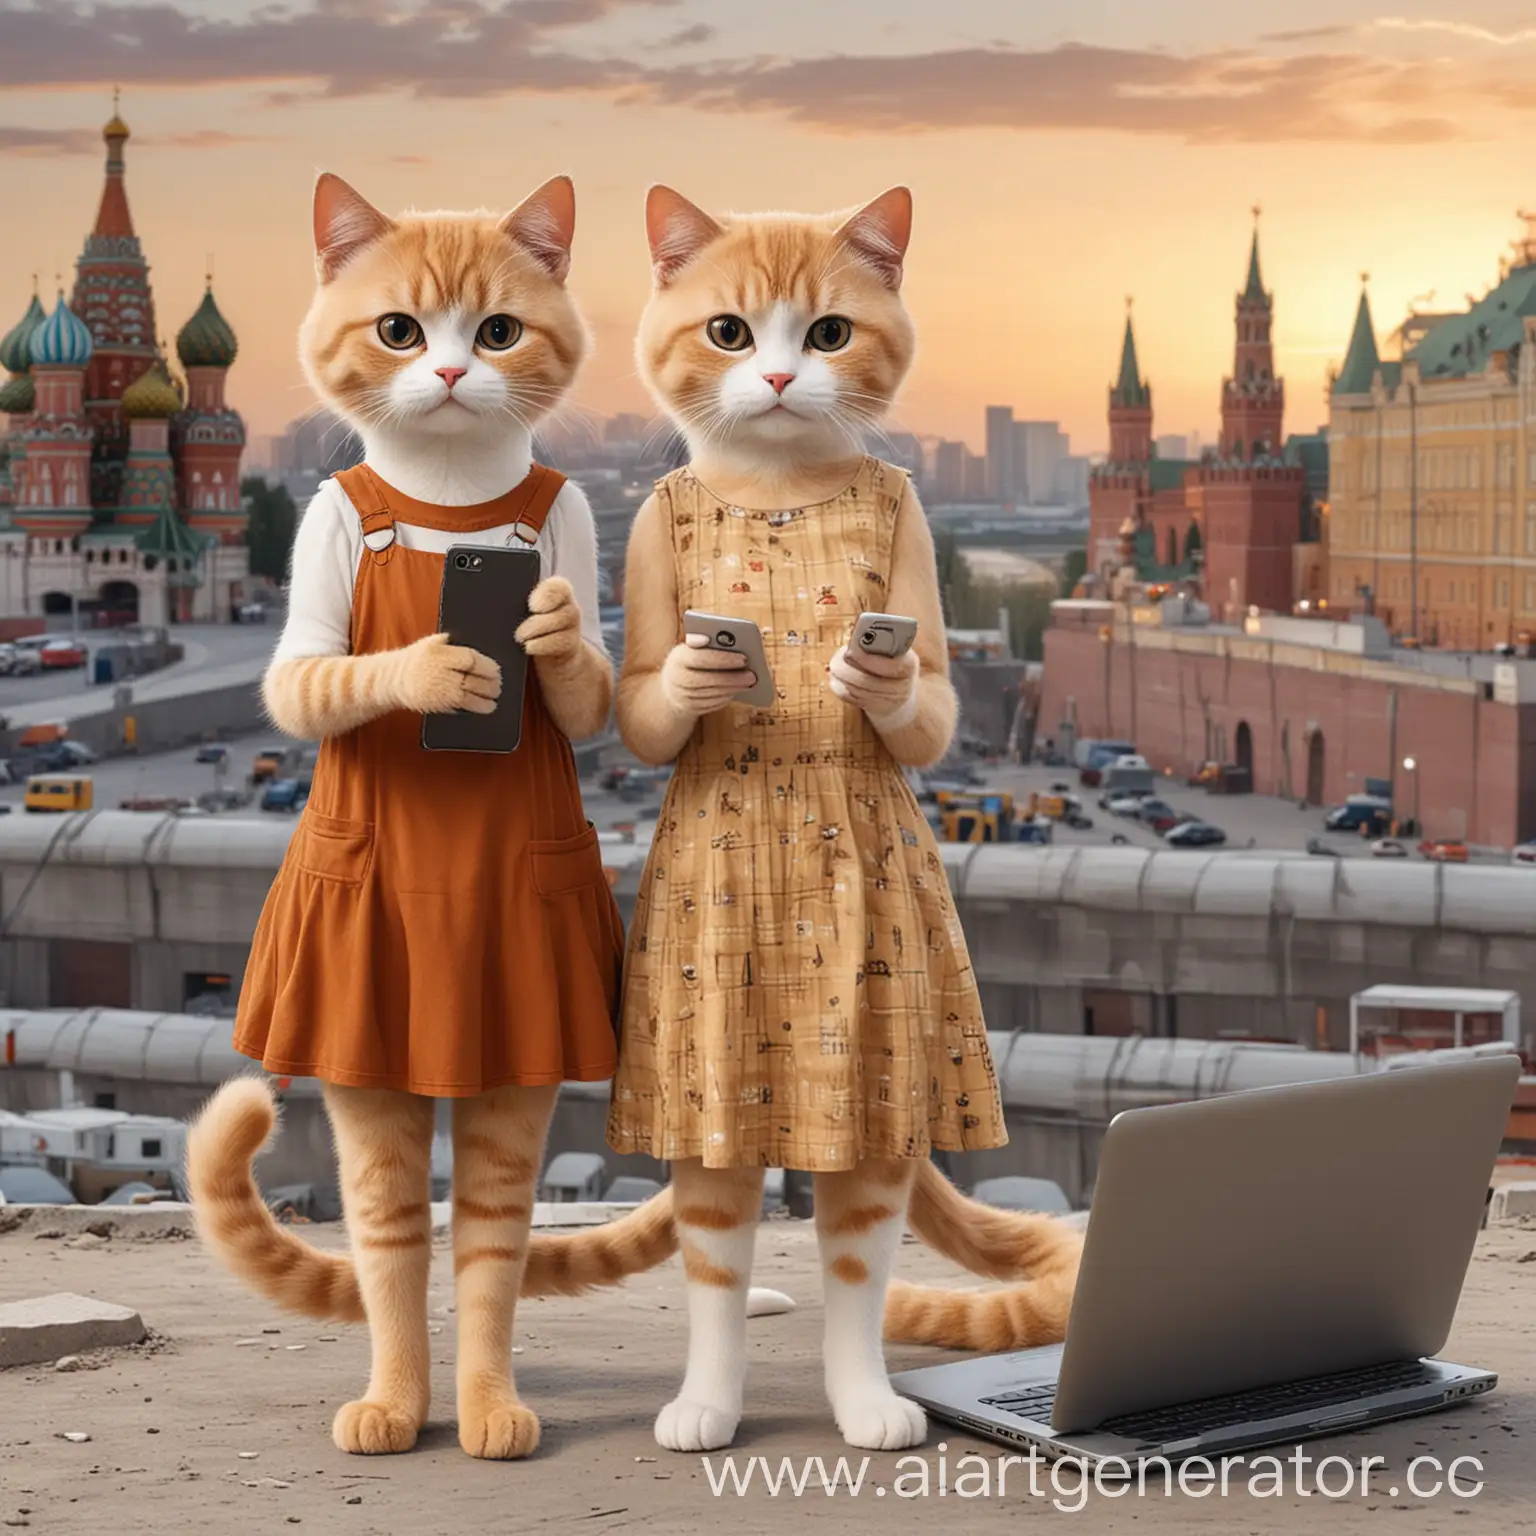 Cartoon-Cats-in-Moscow-Cityscape-Female-Cat-in-Dress-with-Phone-and-Small-Cat-with-Laptop